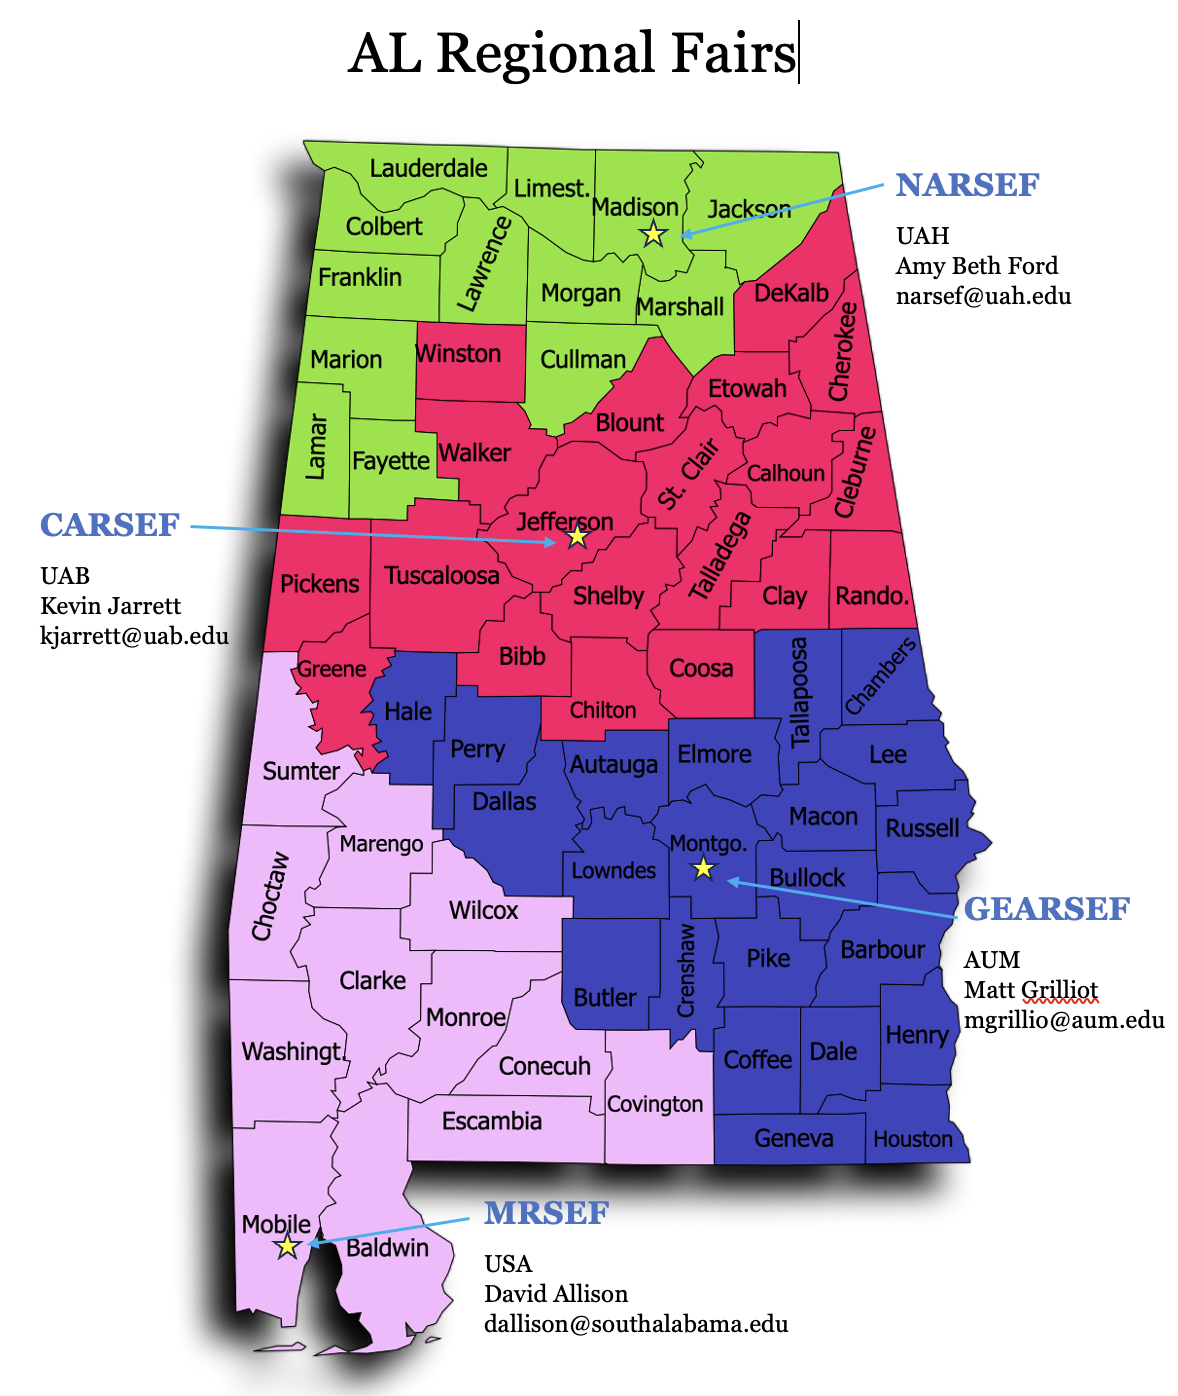 Map of Alabama showing the counties for each regional fair